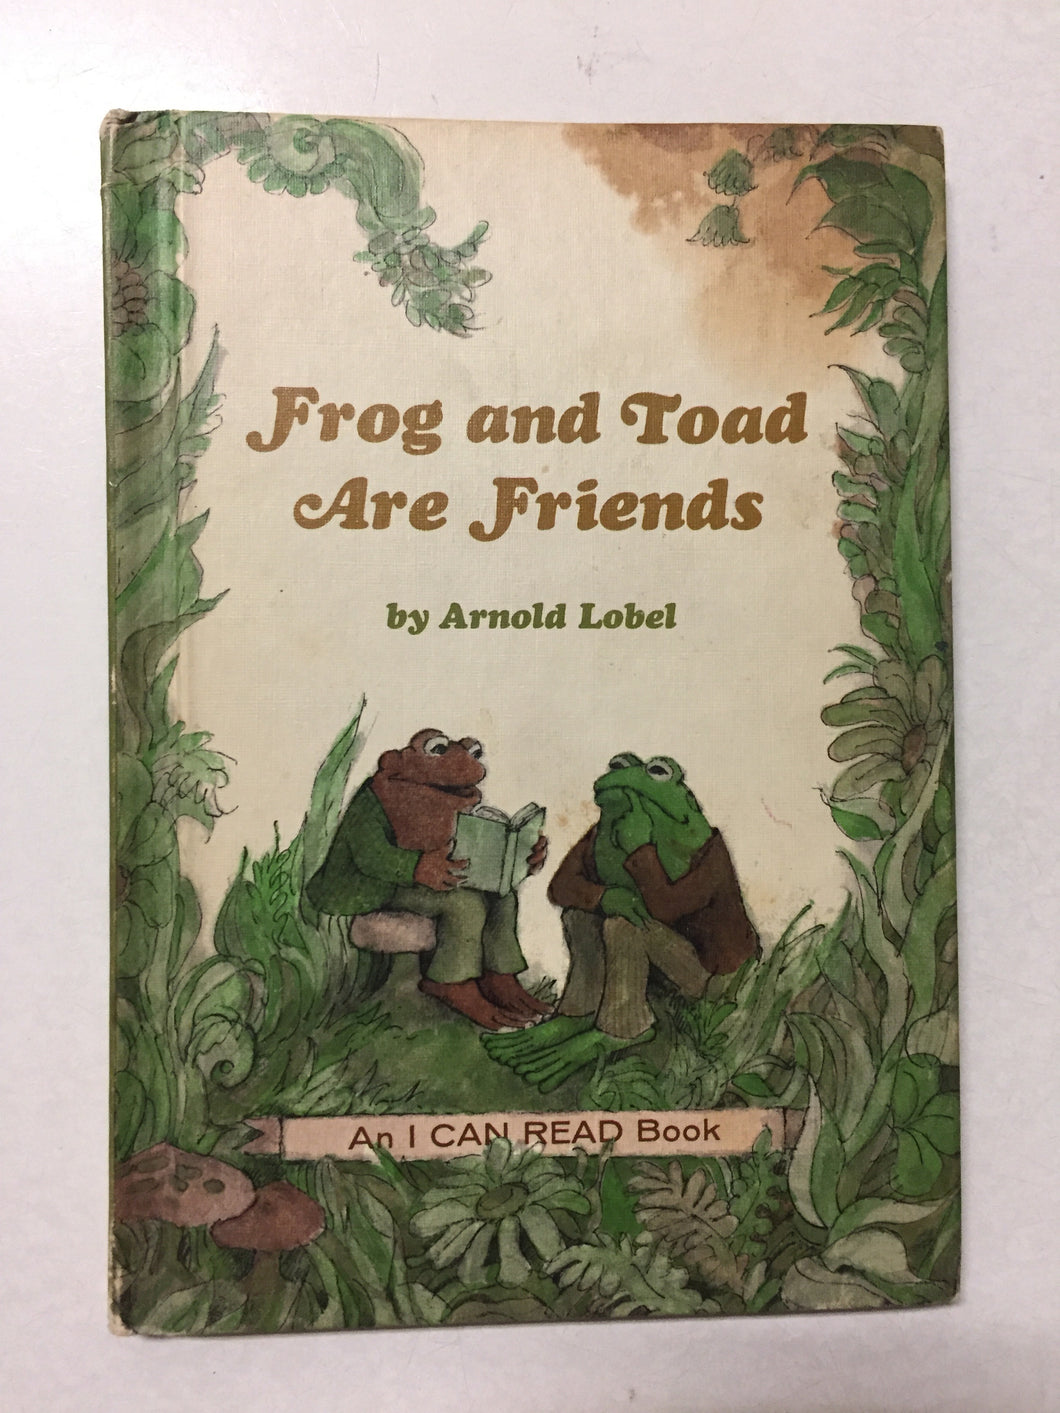 Frog and Toad Are Friends - Slick Cat Books 